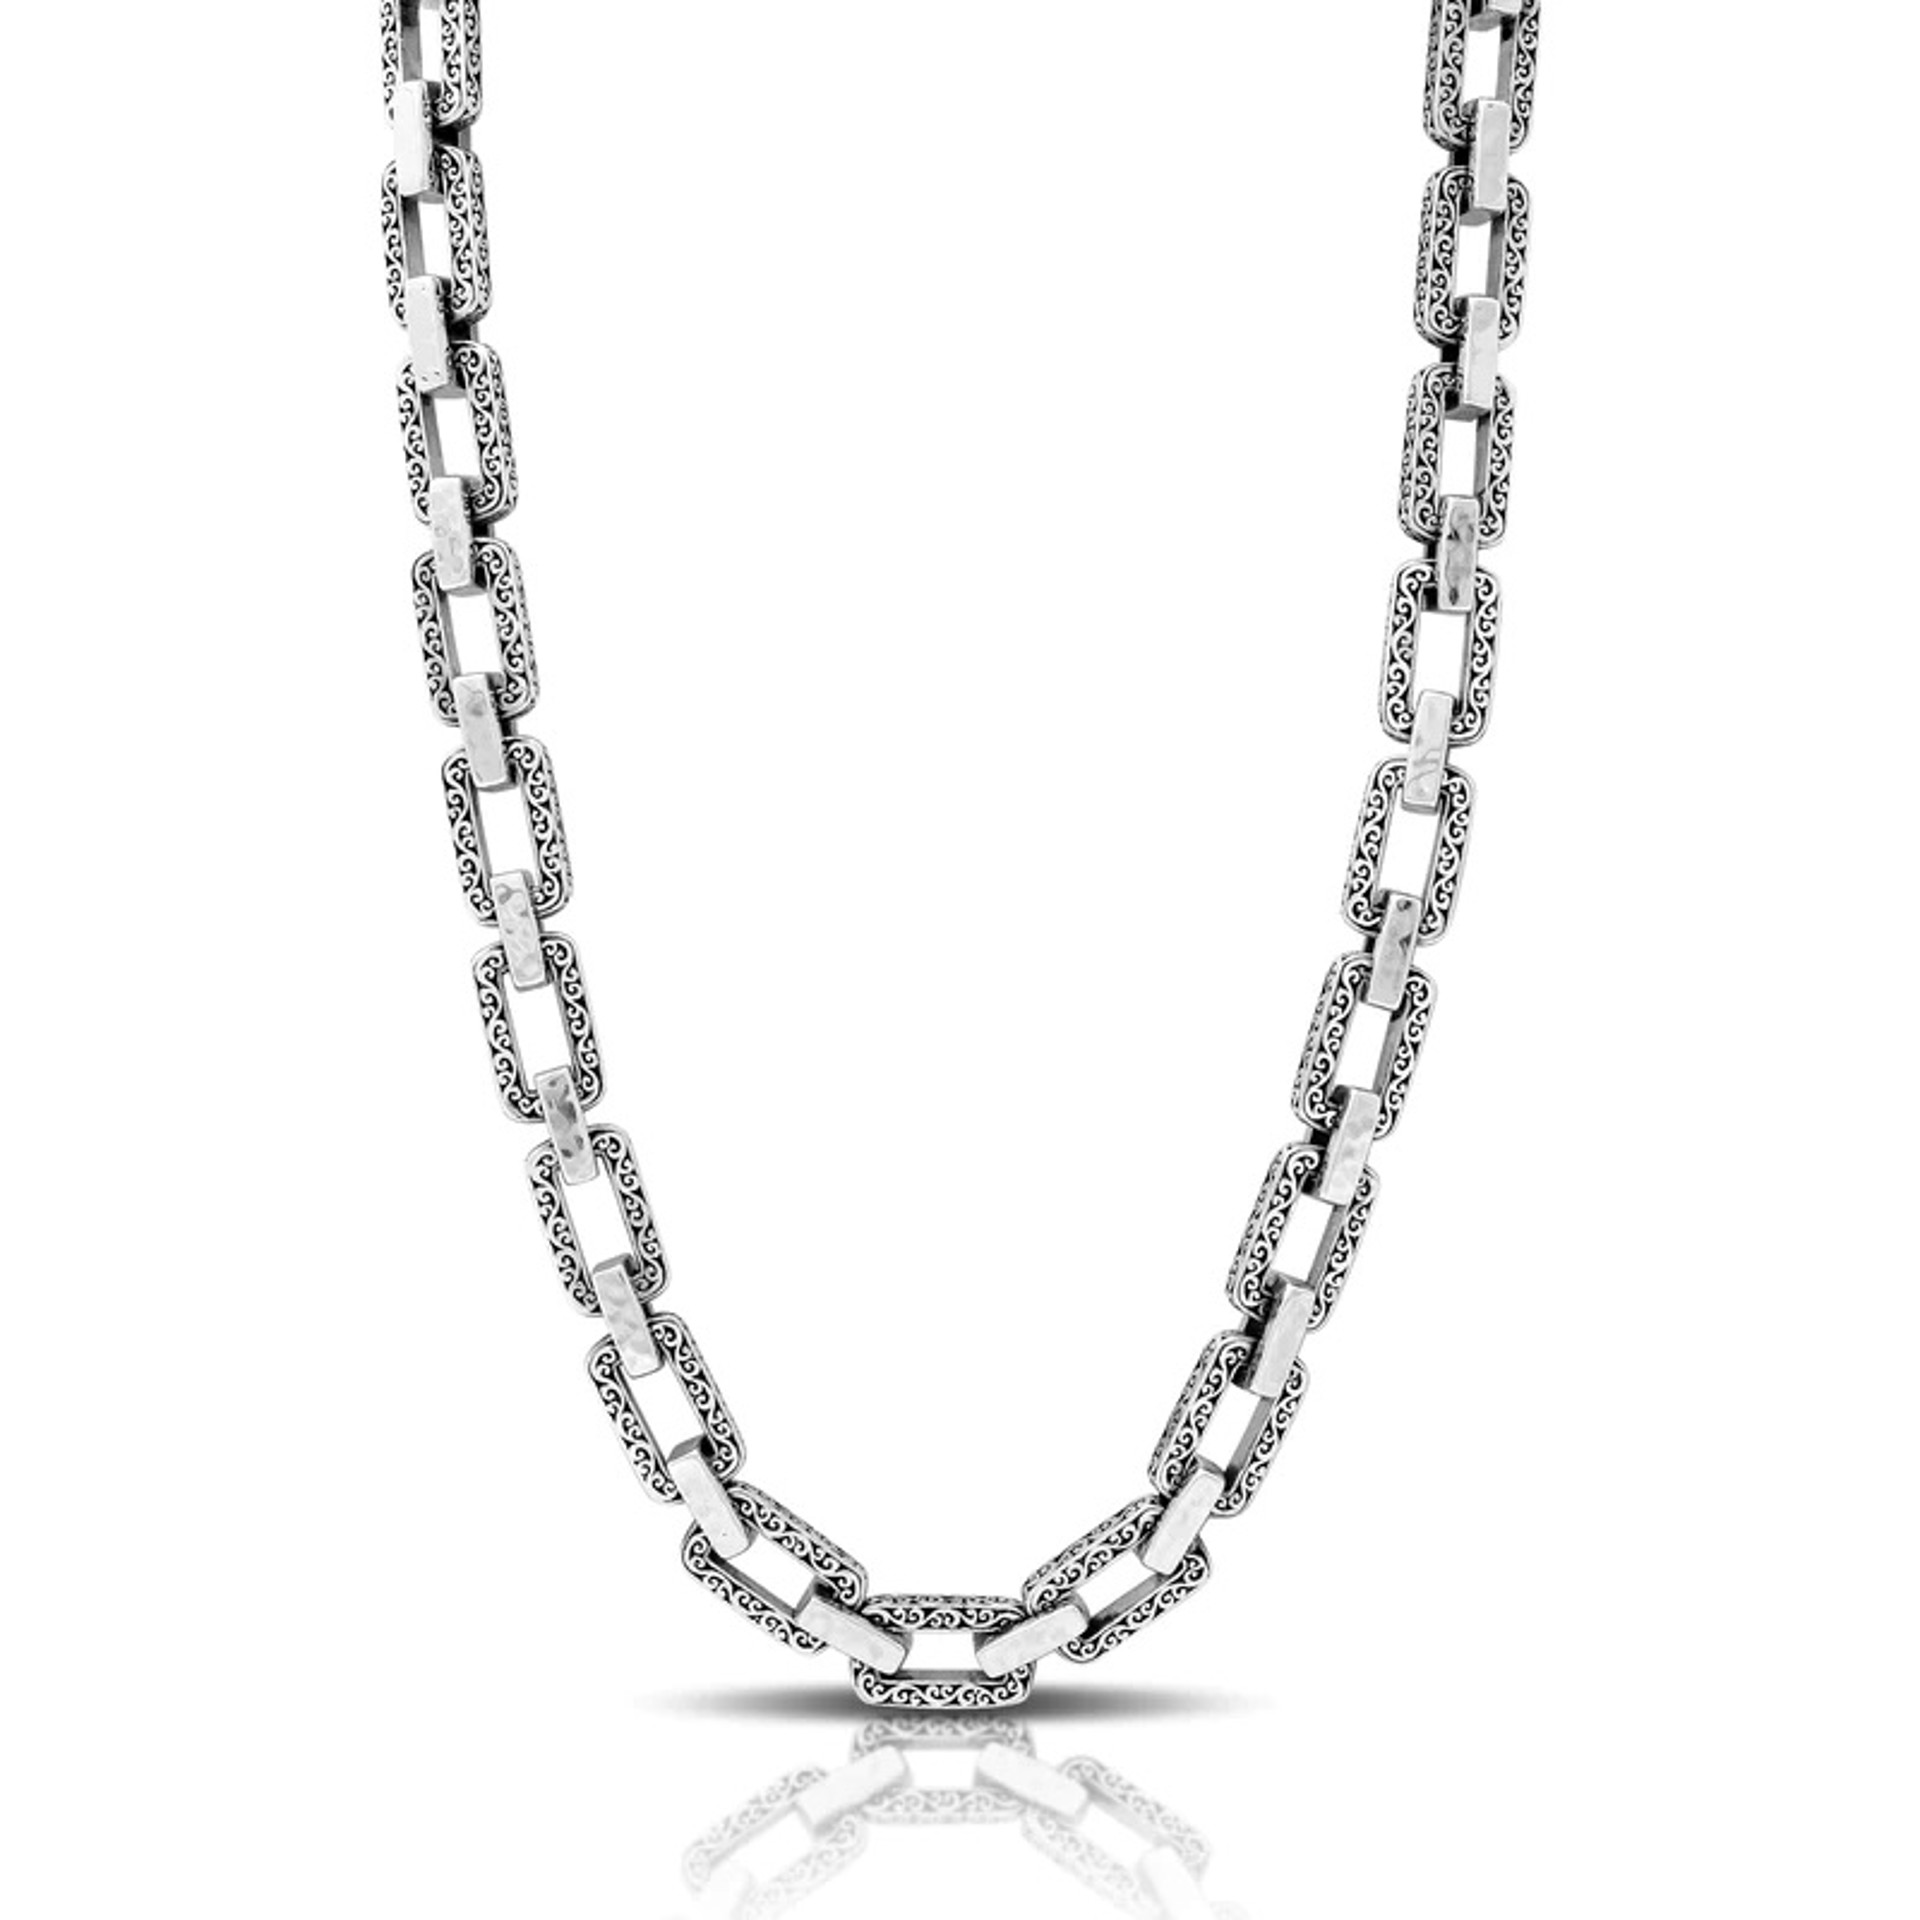 1015 Scroll Rectangular Full Link 18" - 21" Necklace (SO) by Lois Hill